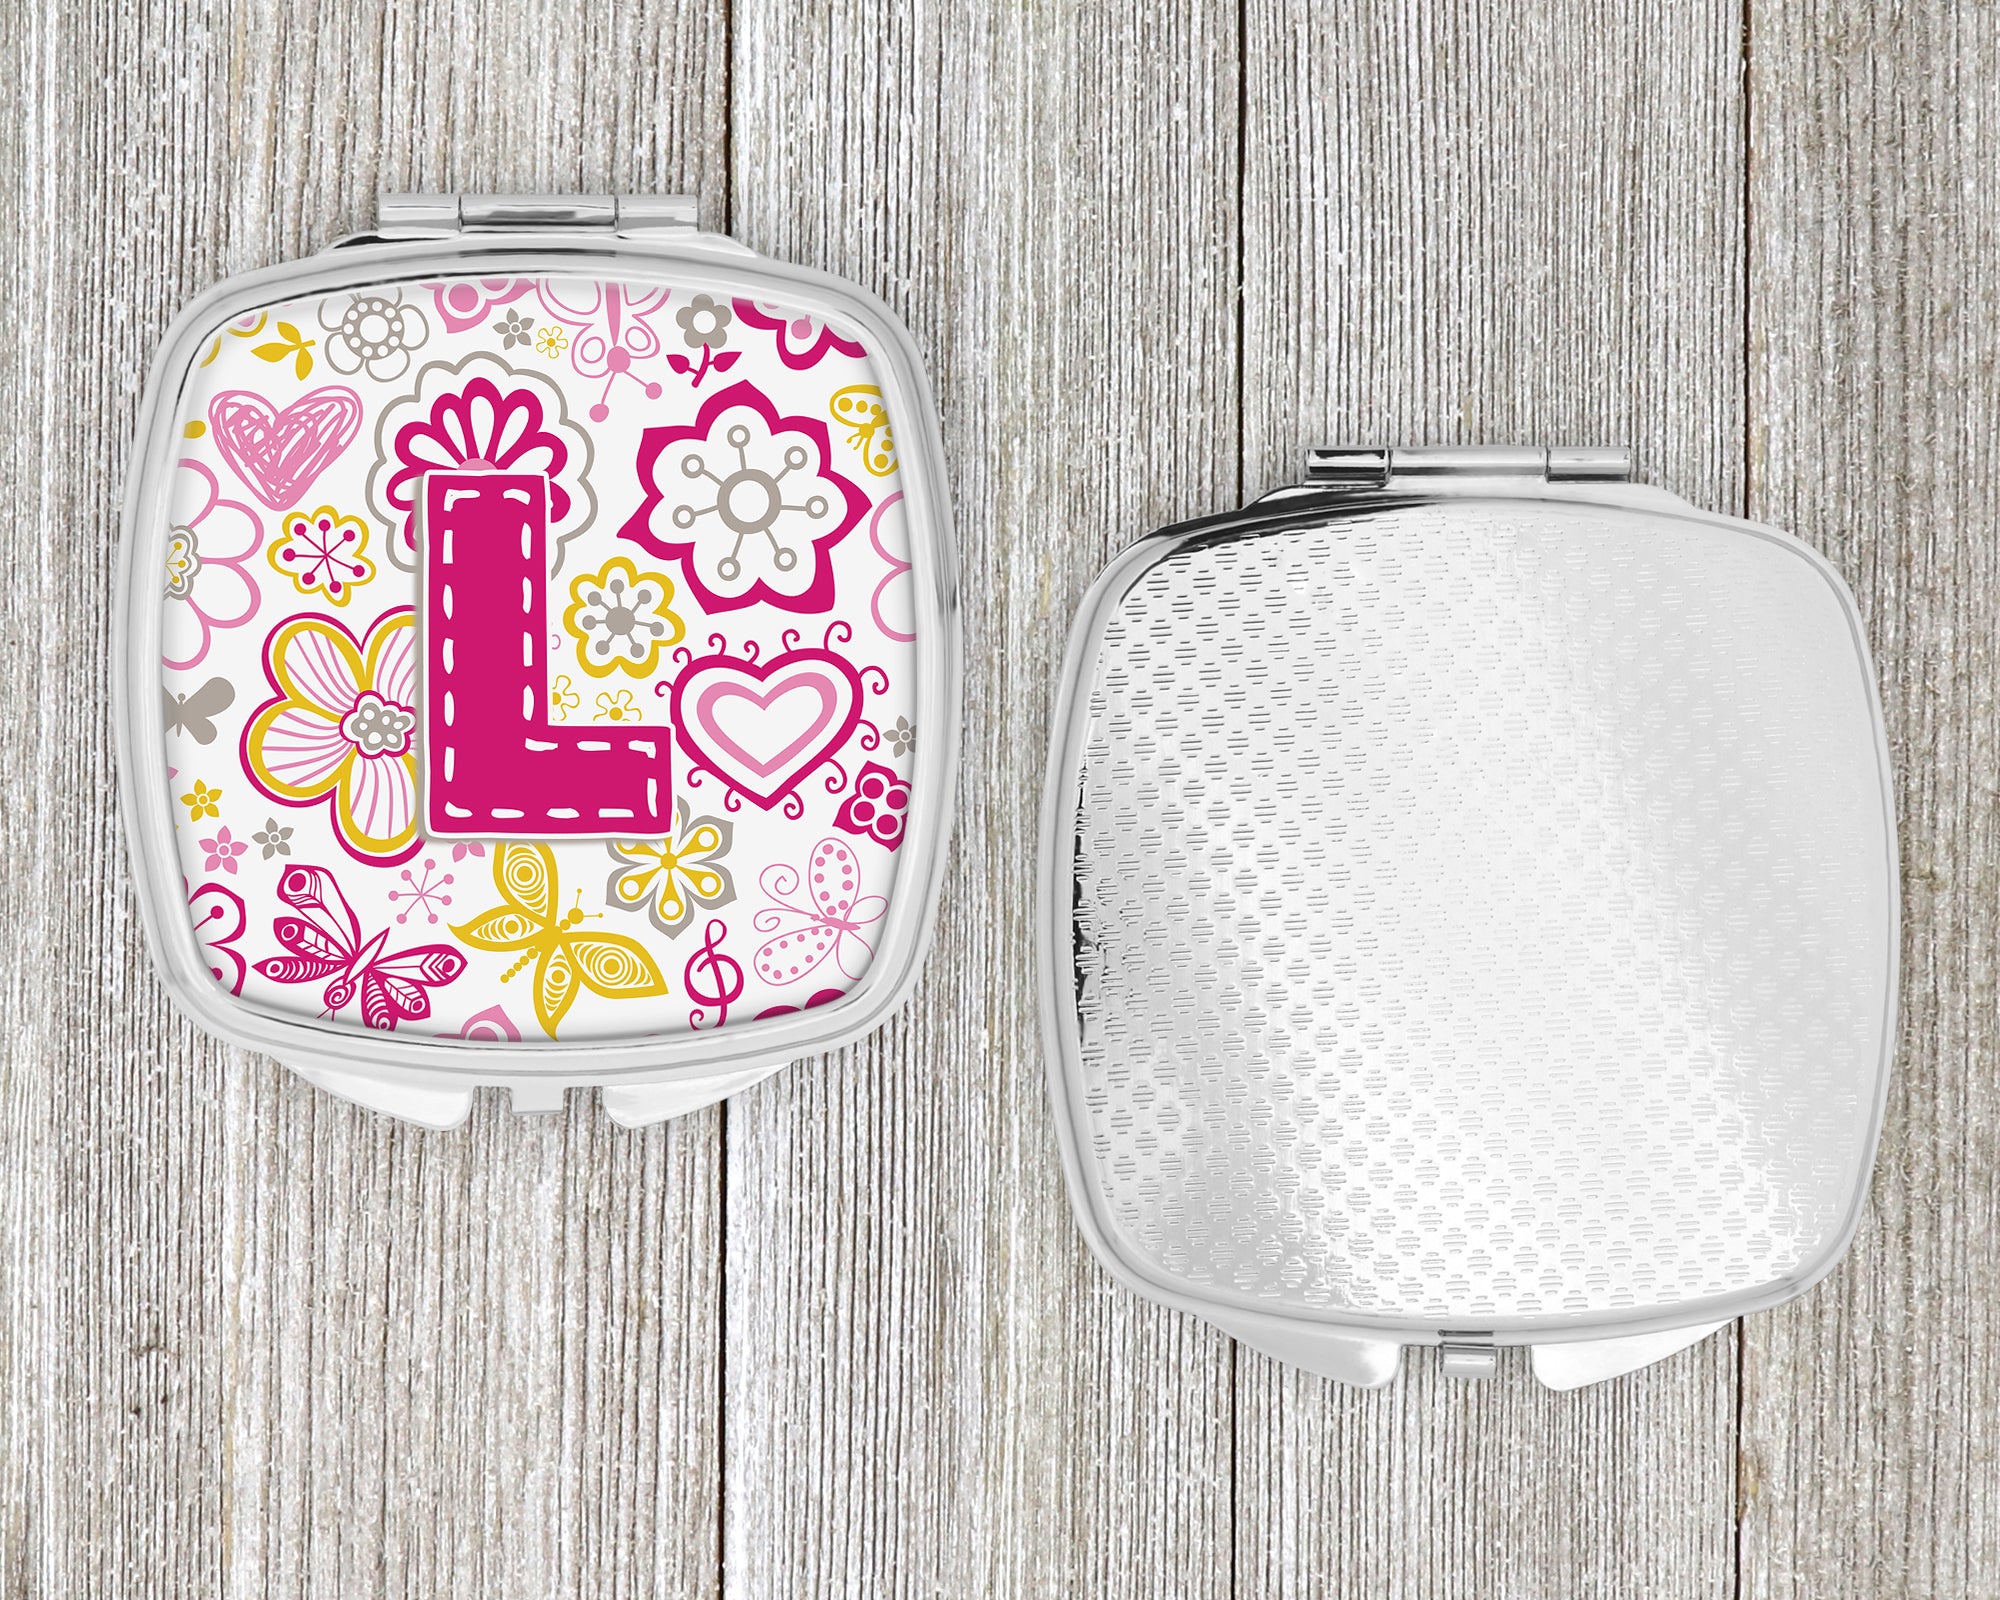 Letter L Flowers and Butterflies Pink Compact Mirror CJ2005-LSCM  the-store.com.